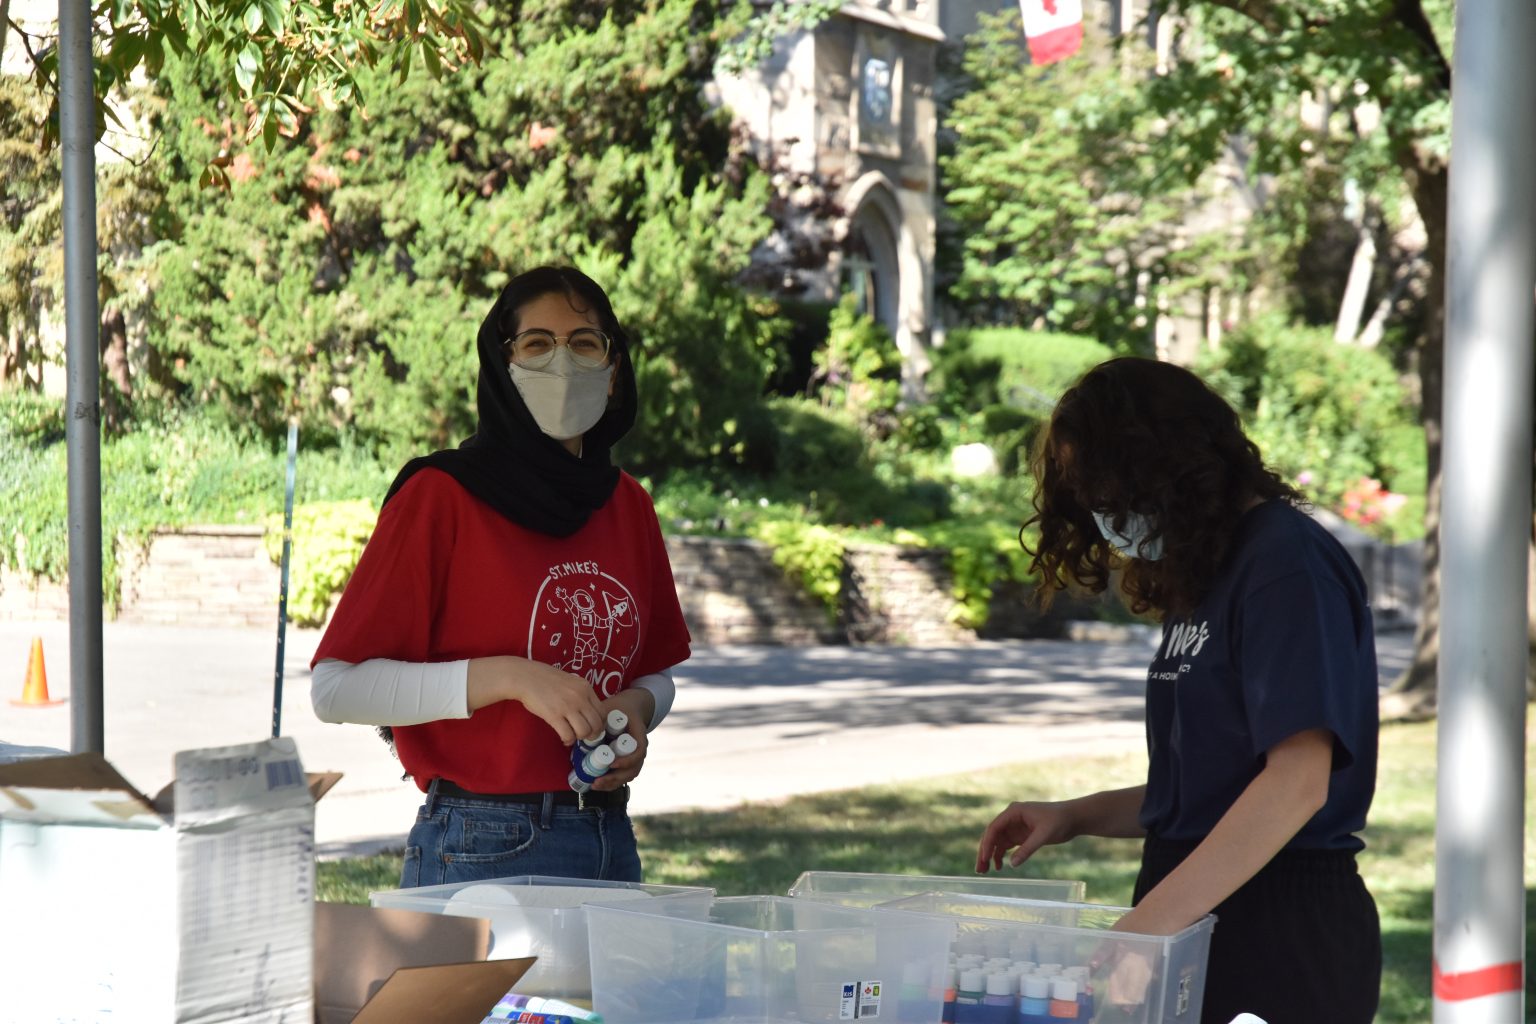 Photograph of two St. Mike's orientation leaders (wearing masks) organizing art supplies under a tent on campus